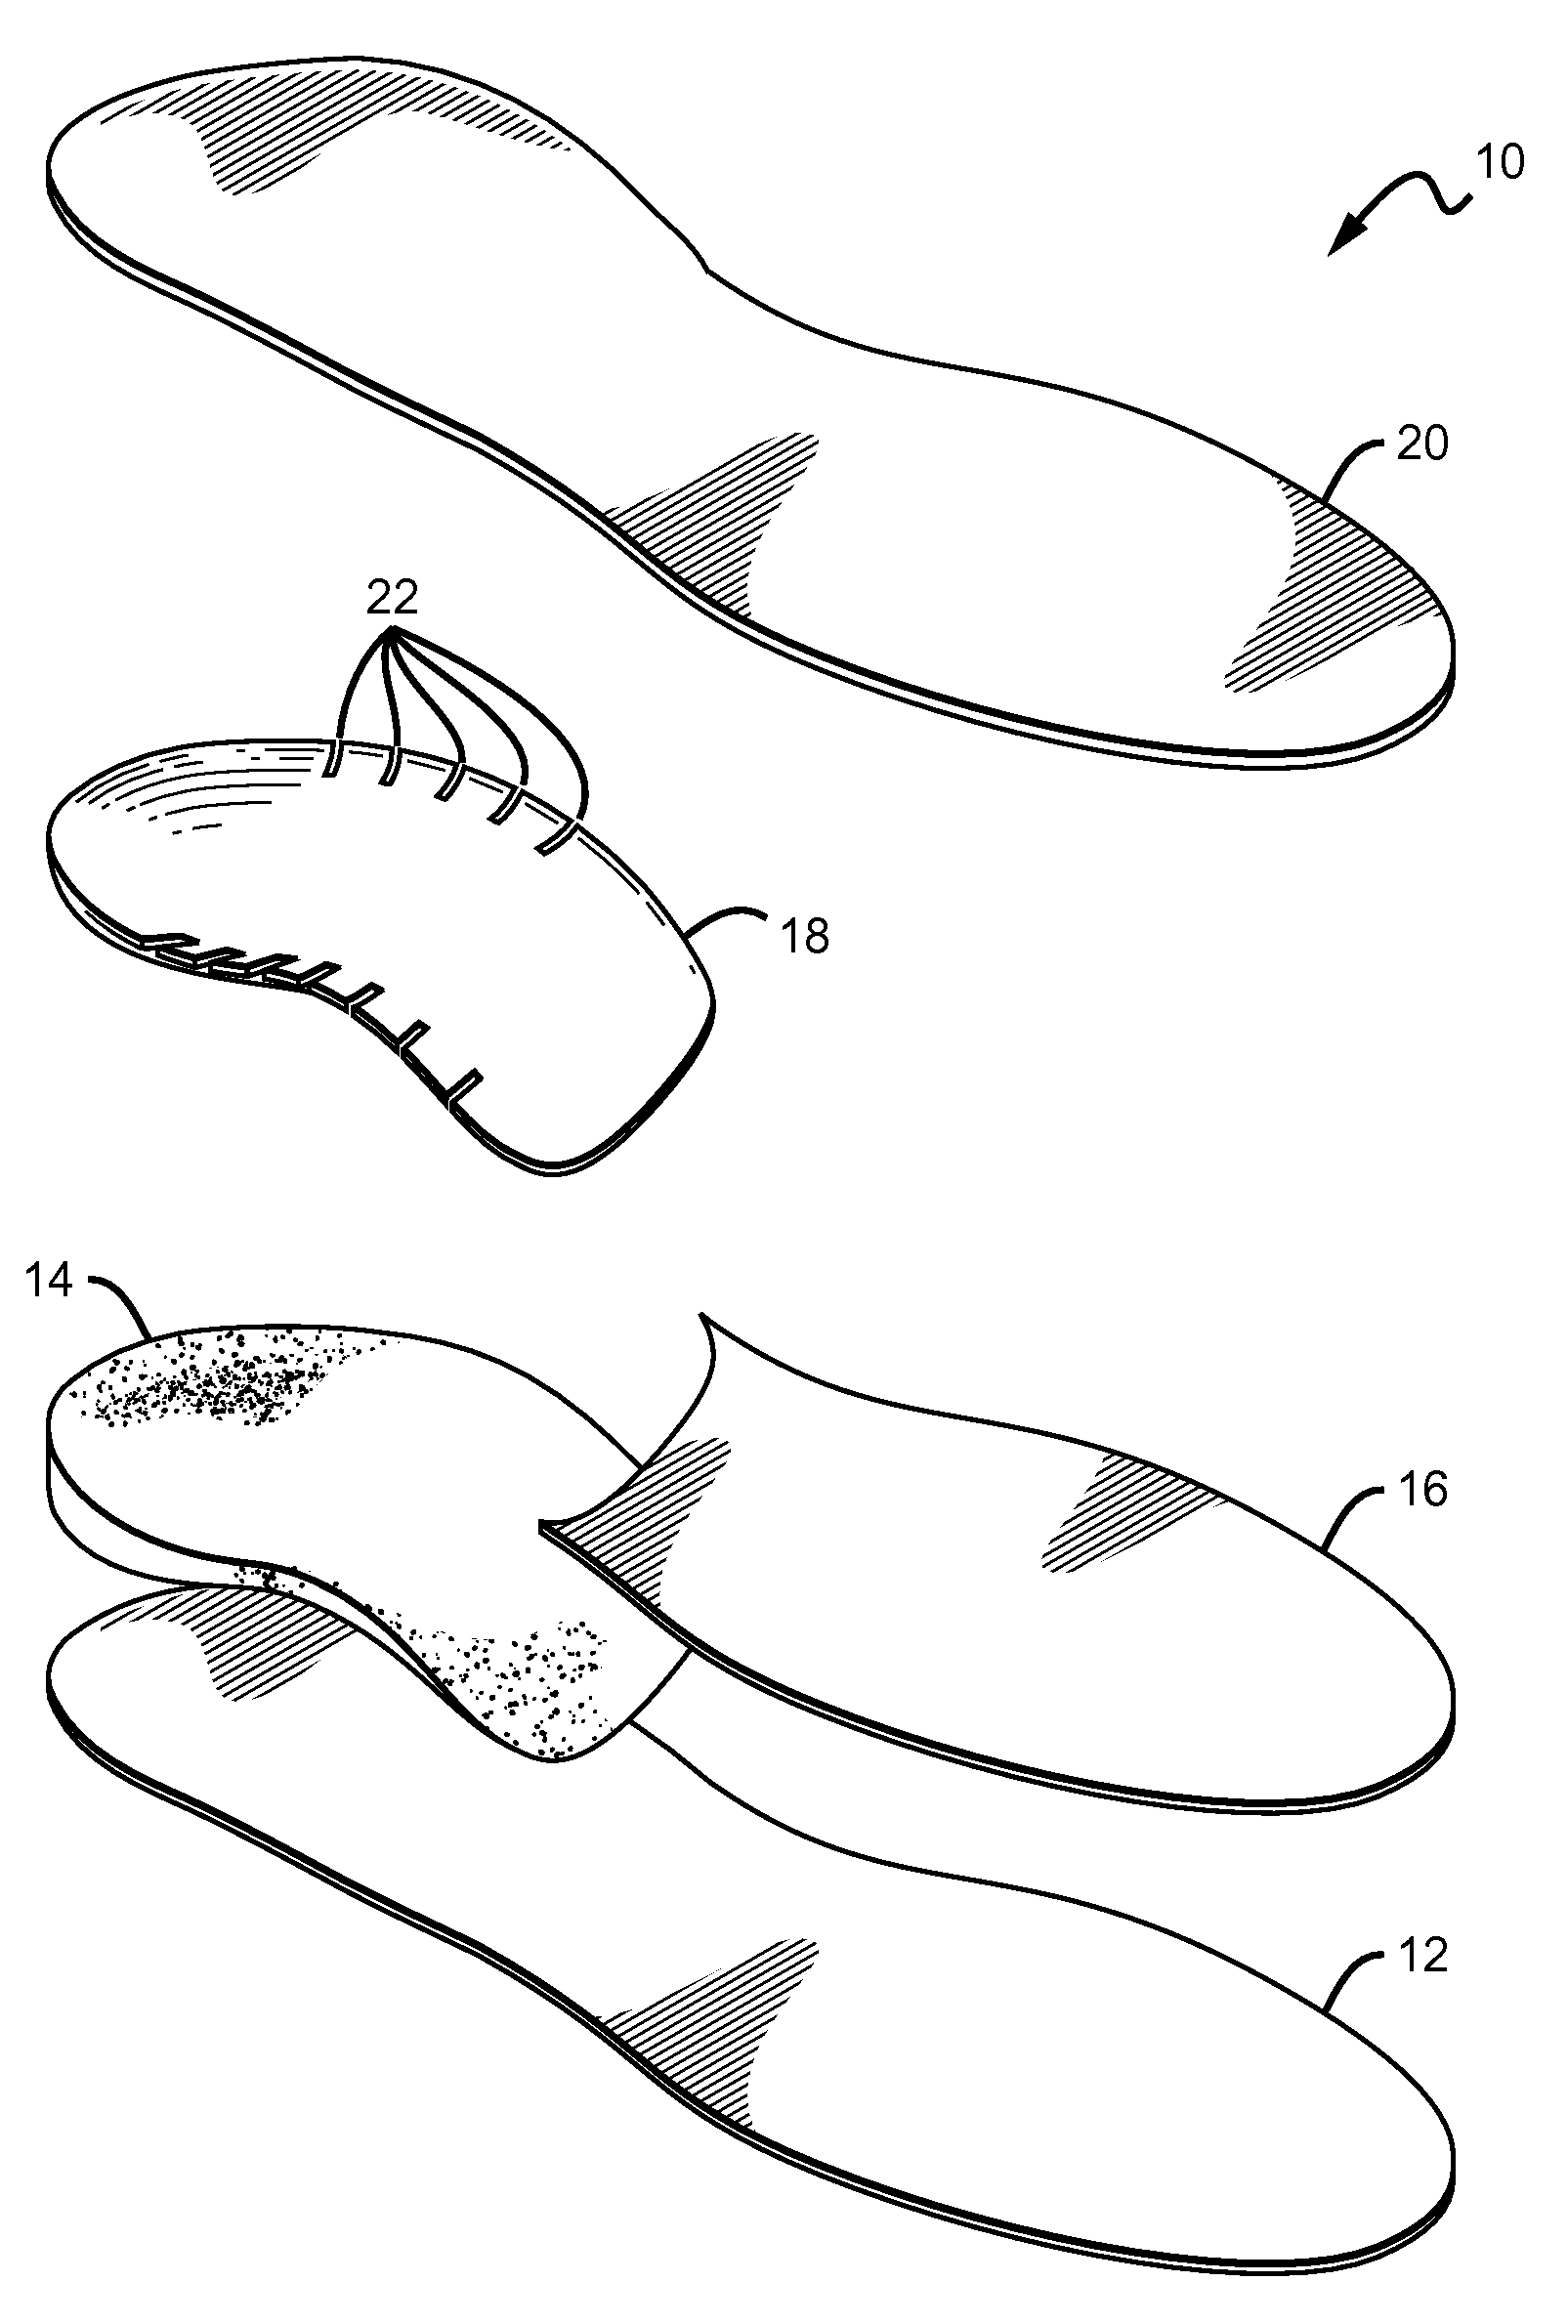 Improved orthotic shell for orthopedic sole insert